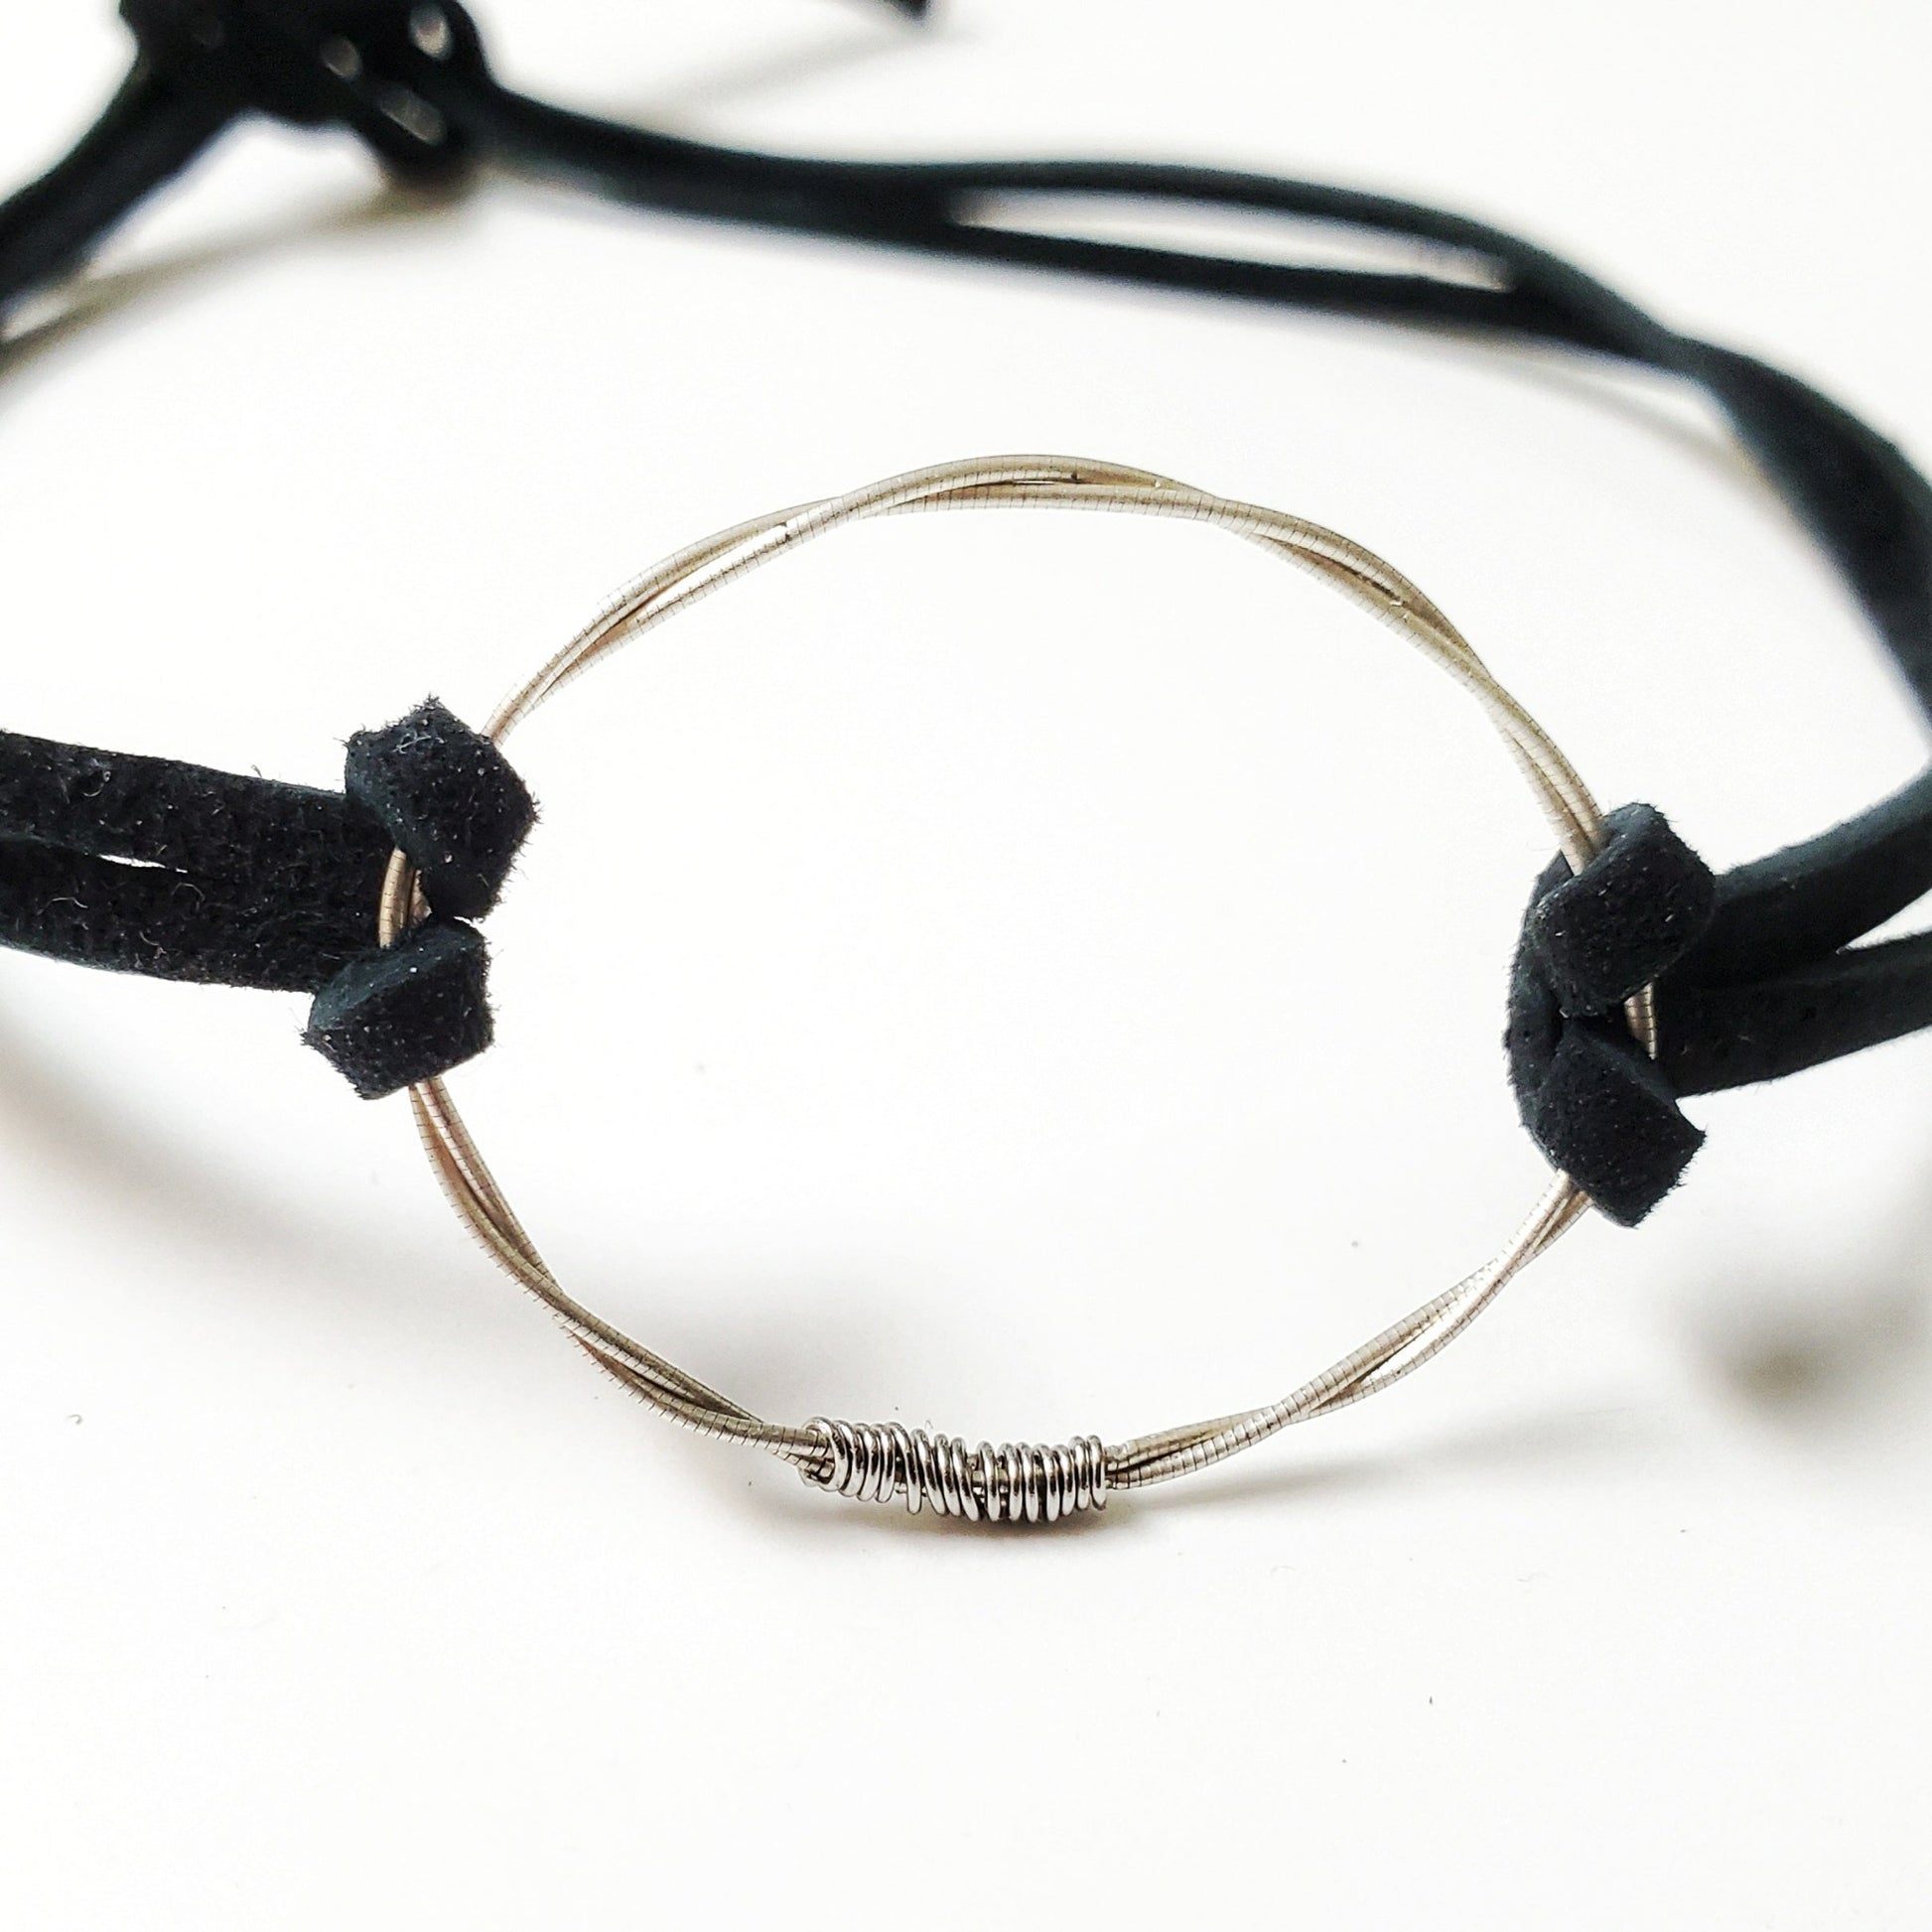 close-up of a choker style necklace - in the middle is a circle made from a piece of upcycled violin string on either side there are black suede cords 